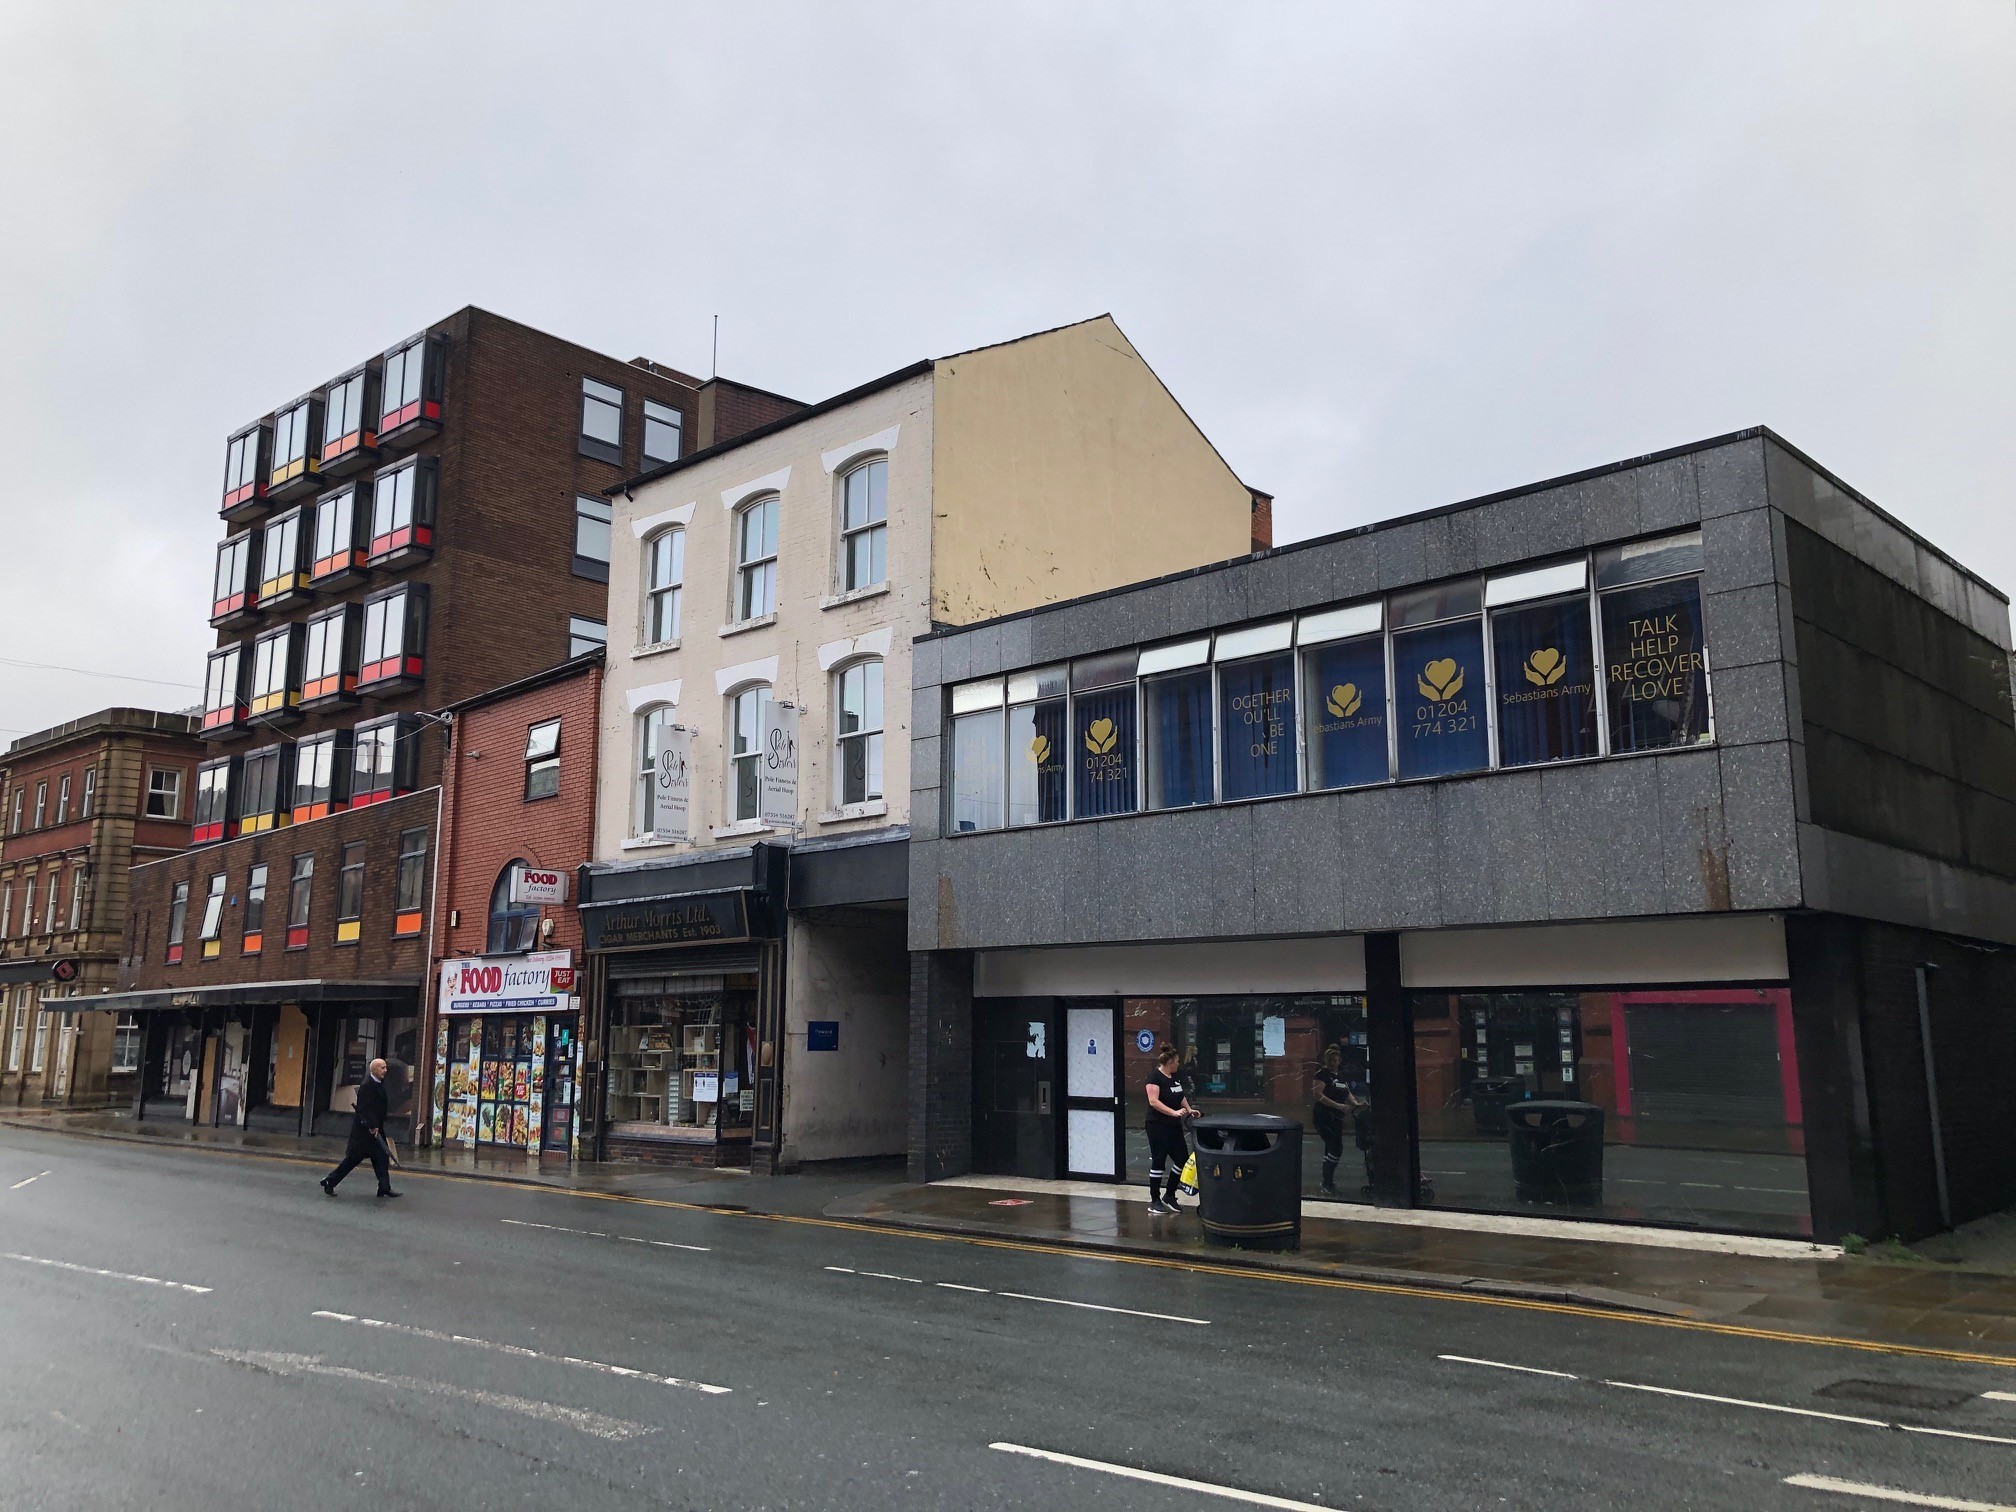 Late night bar plans on Bradshawgate submitted once again | The Bolton News